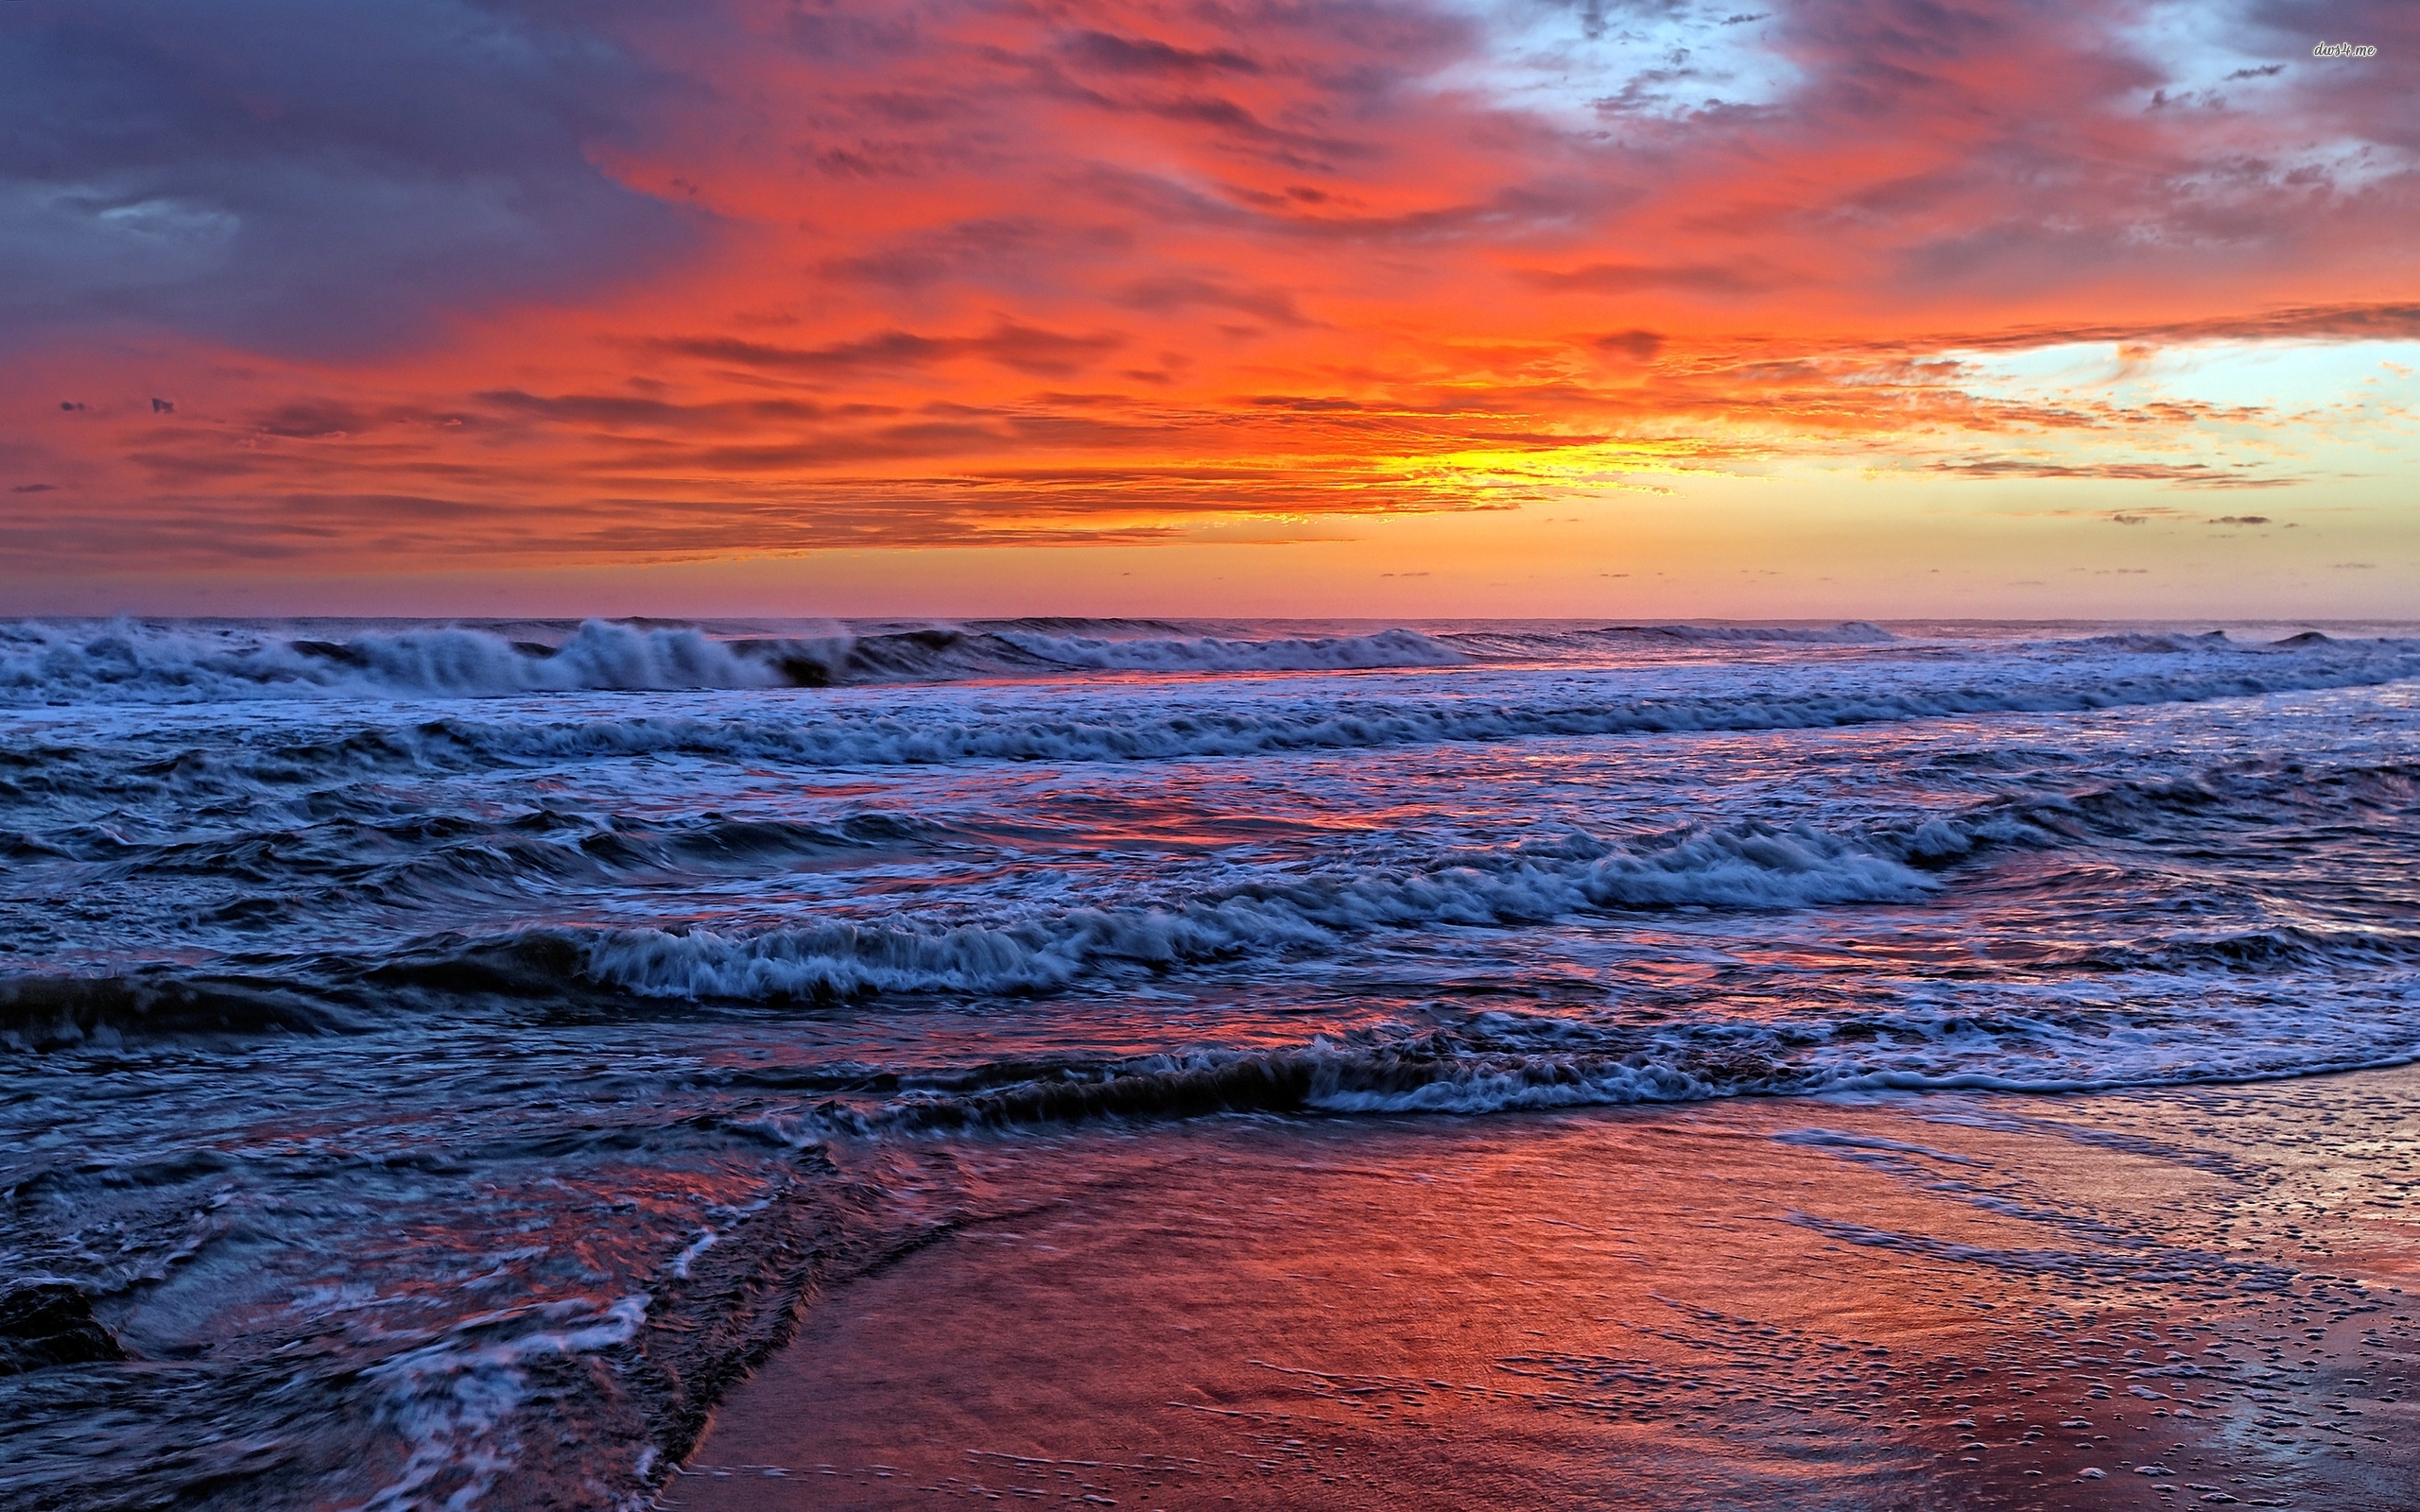 Red sunset sky above the wavy ocean wallpaper - Beach wallpapers ...